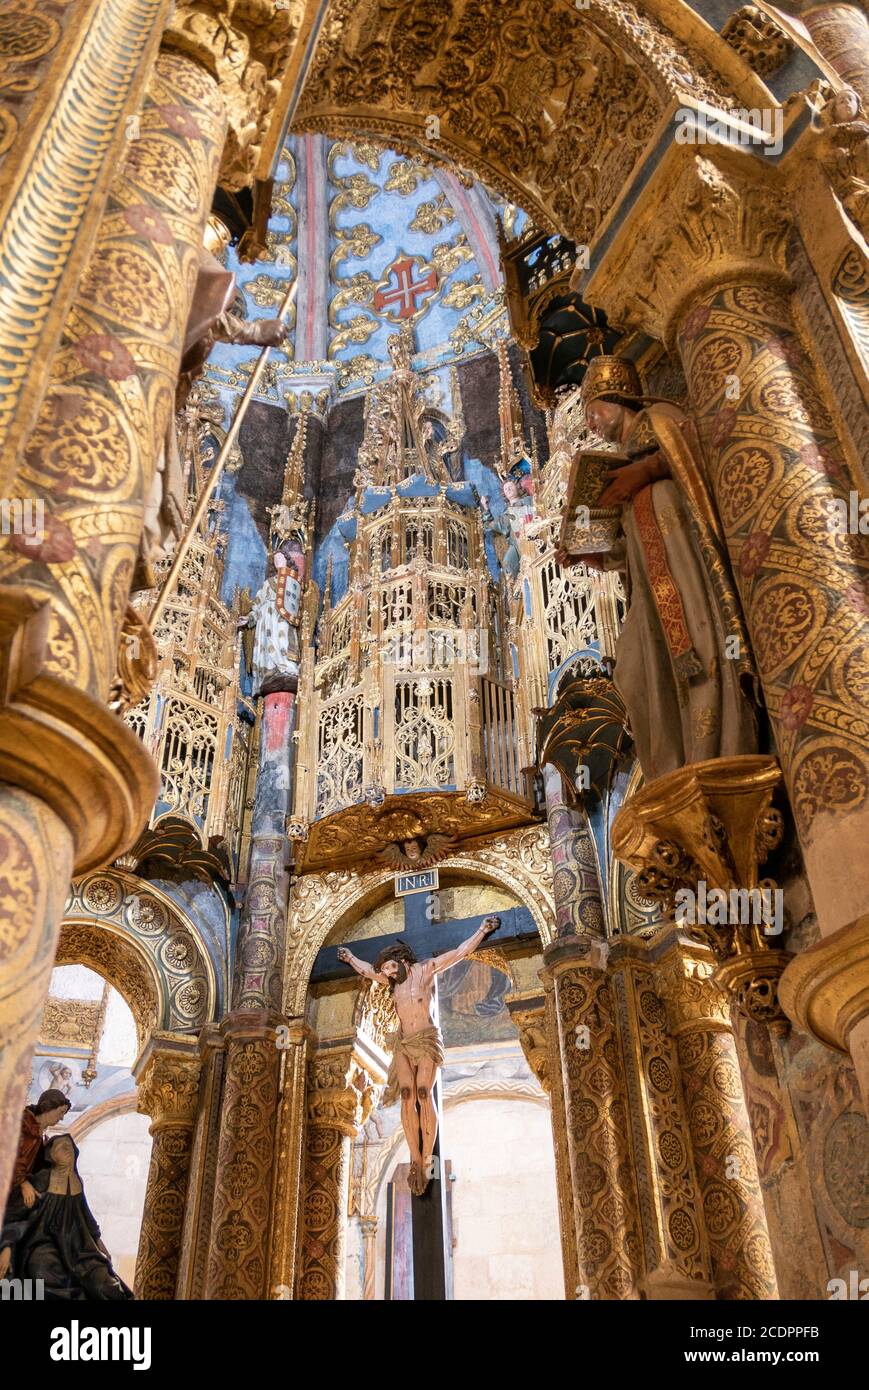 Interior of the Round church decorated with late Gothic painting and sculpture at the Convent of Christ / Convento de Cristo, Tomar, Portugal, Europe Stock Photo